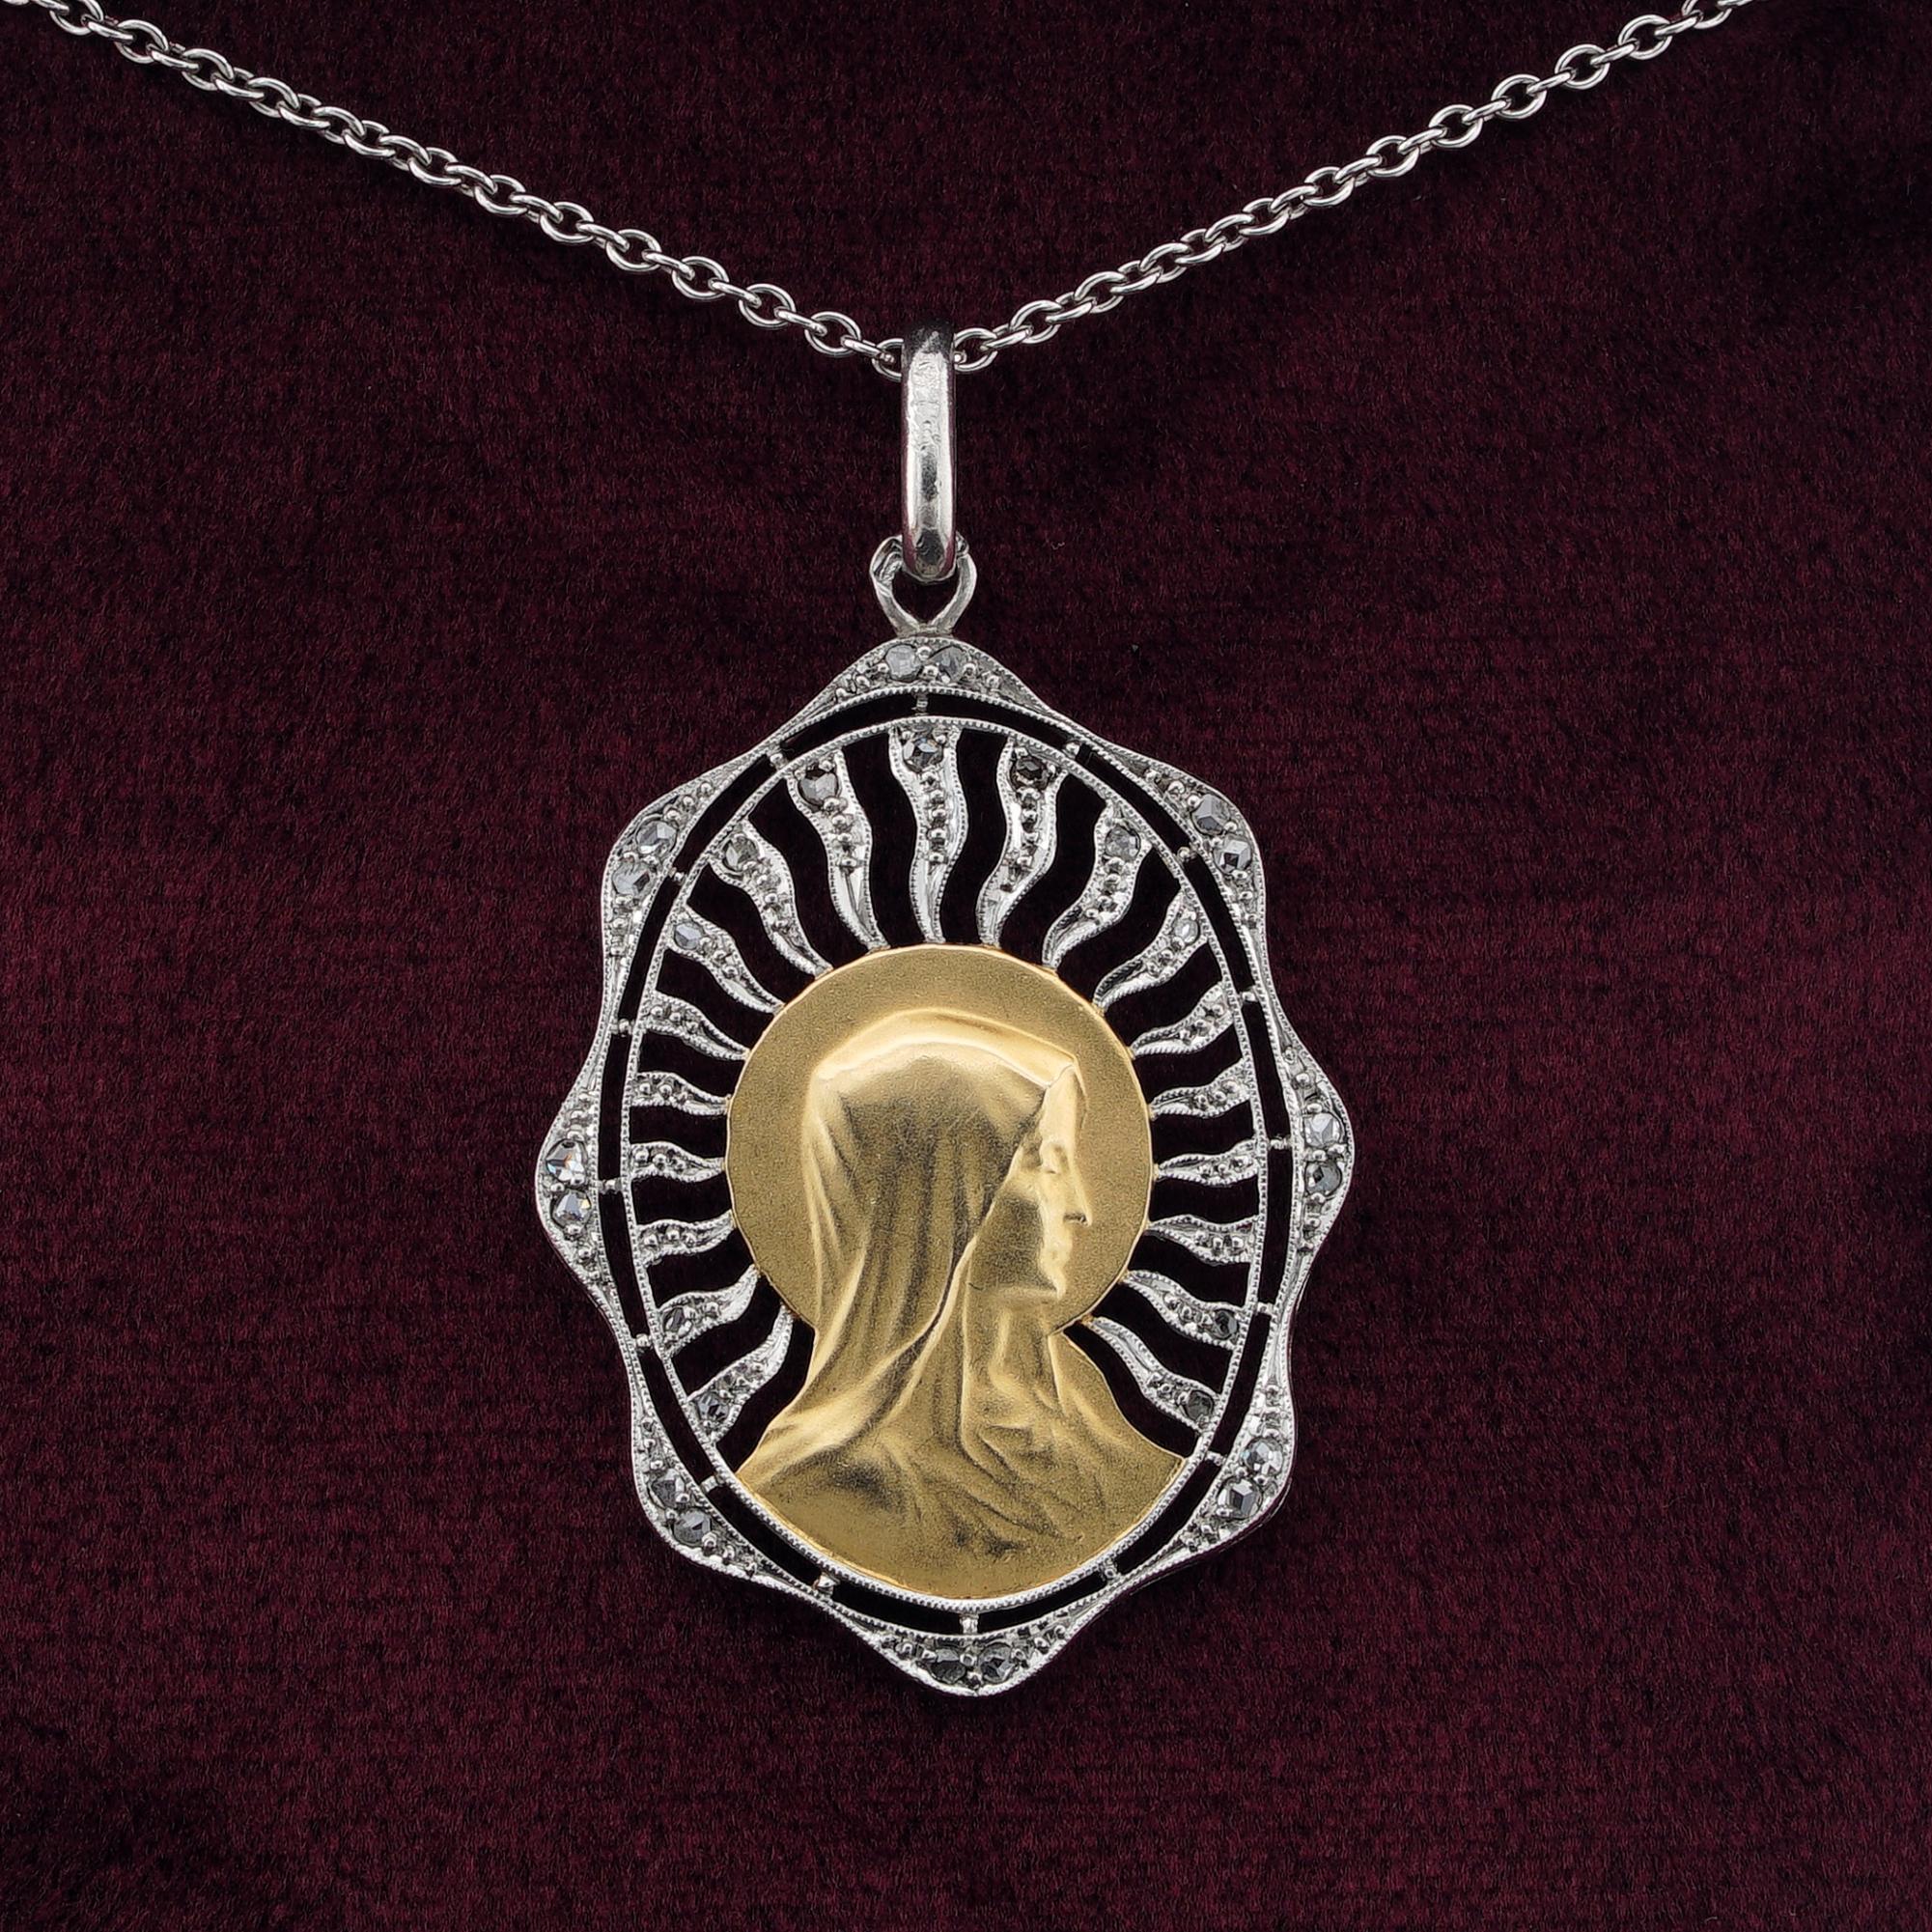 Holy Mother
This beautiful antique French pendant dates 1926 as precisely hand engraved, bearing French hallmarks
A fine Art Deco version of the Virgin Mary, beautiful depicted and rendered in a timeless artwork of solid 18 KT and Platinum
The